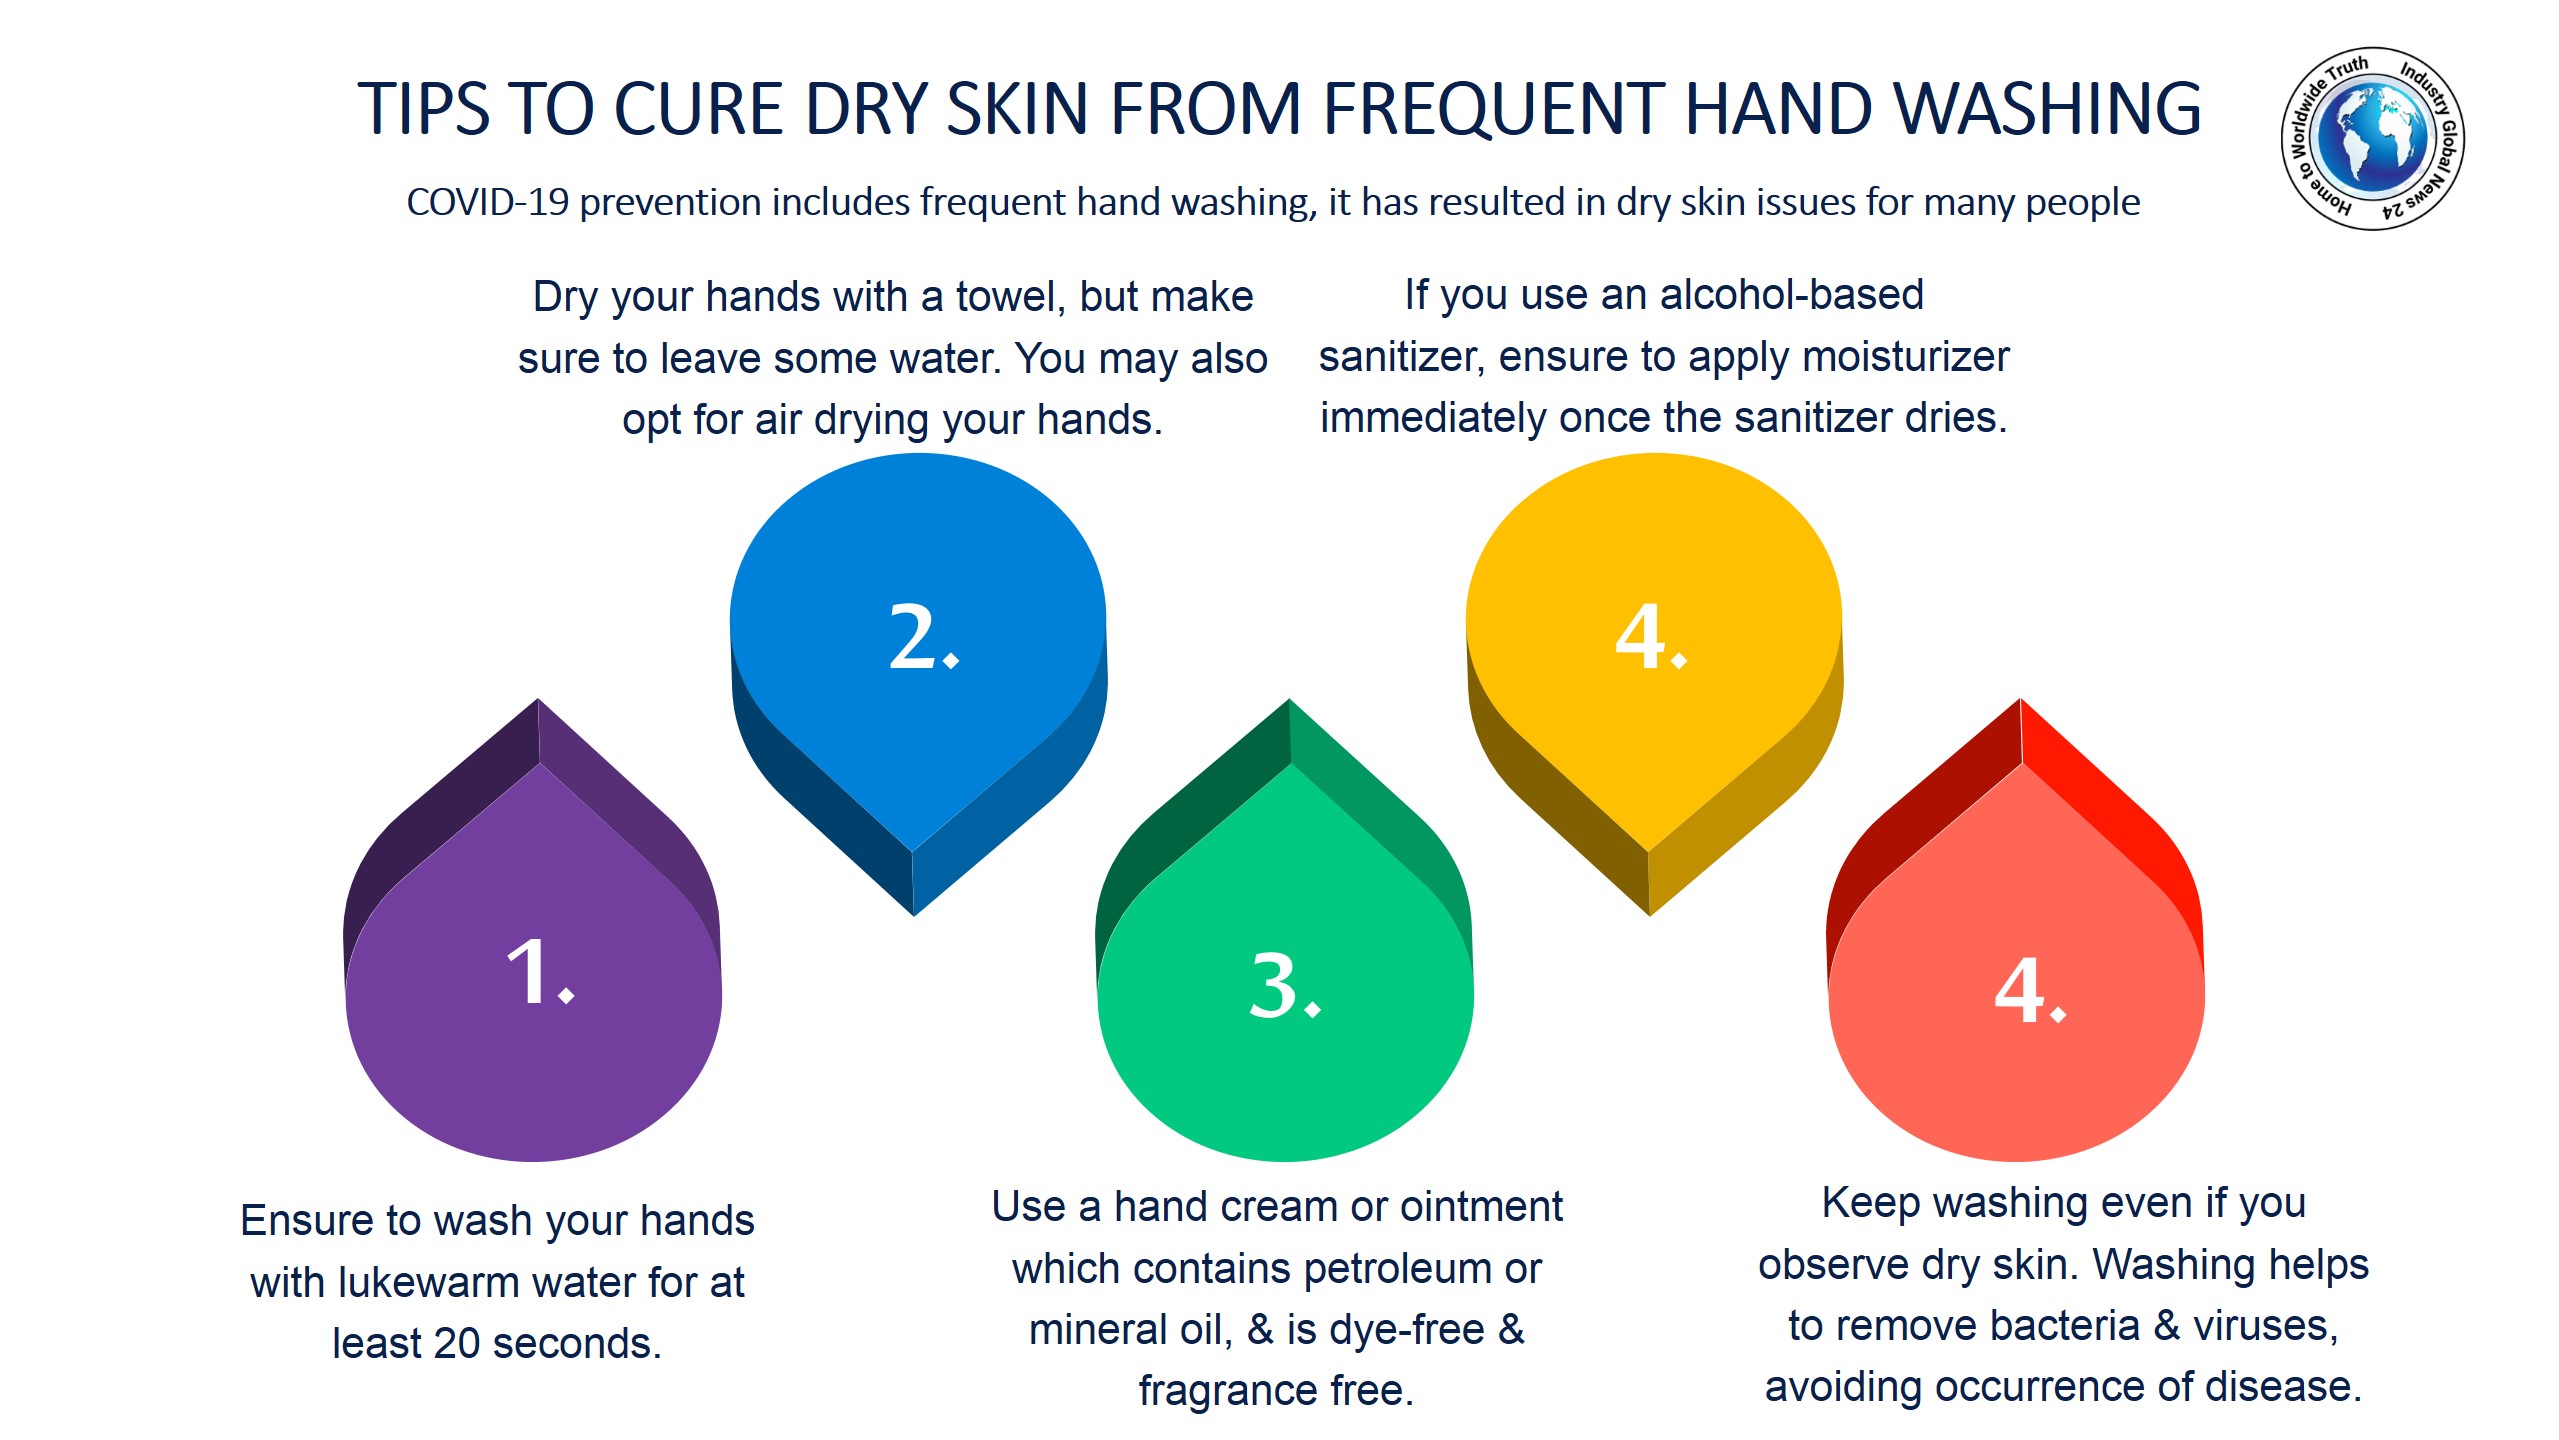 Tips to cure dry skin from frequent hand washing